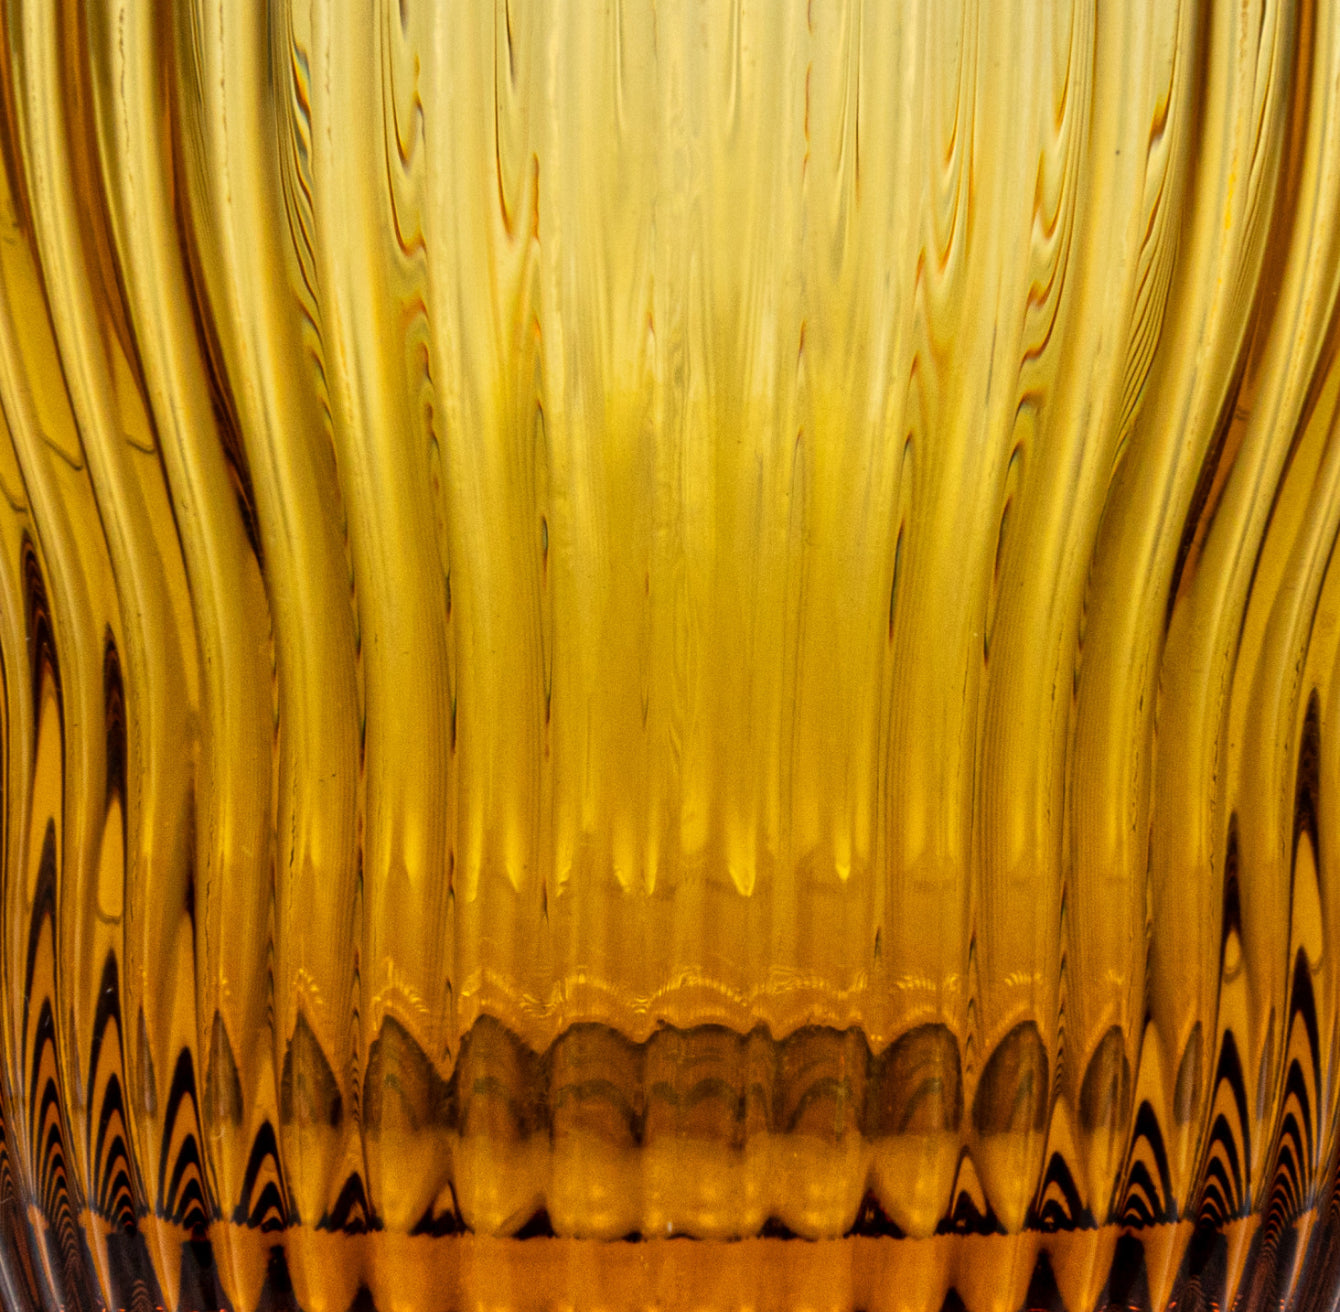 Fluted Drinking Glass - Amber